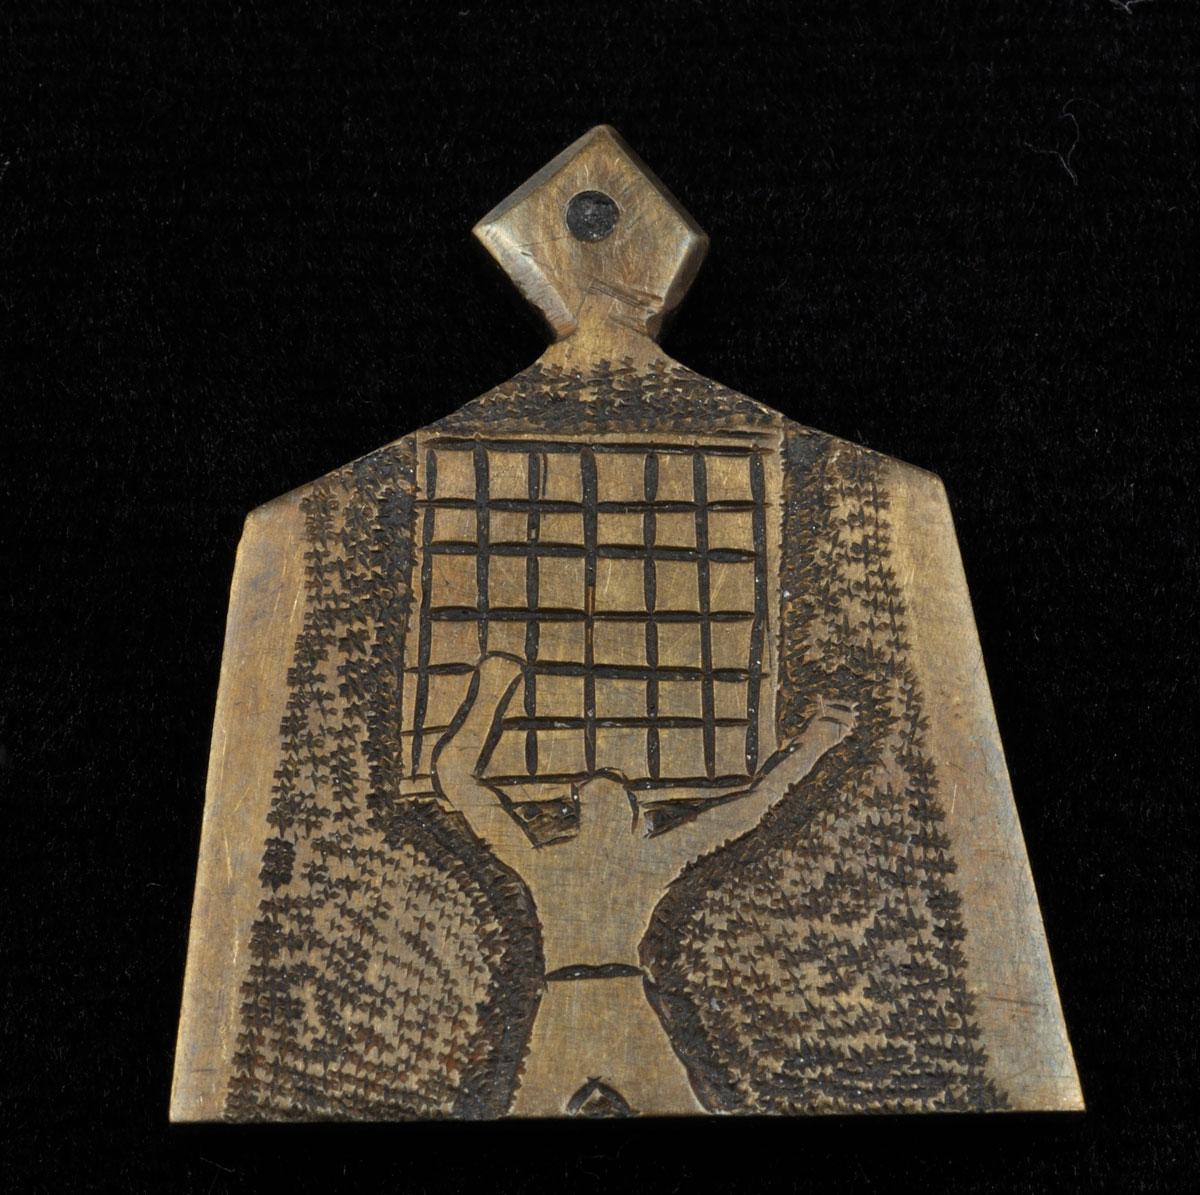 The depiction of a prisoner on the pendant that Misu Wolf crafted for his girlfriend Sali Buium